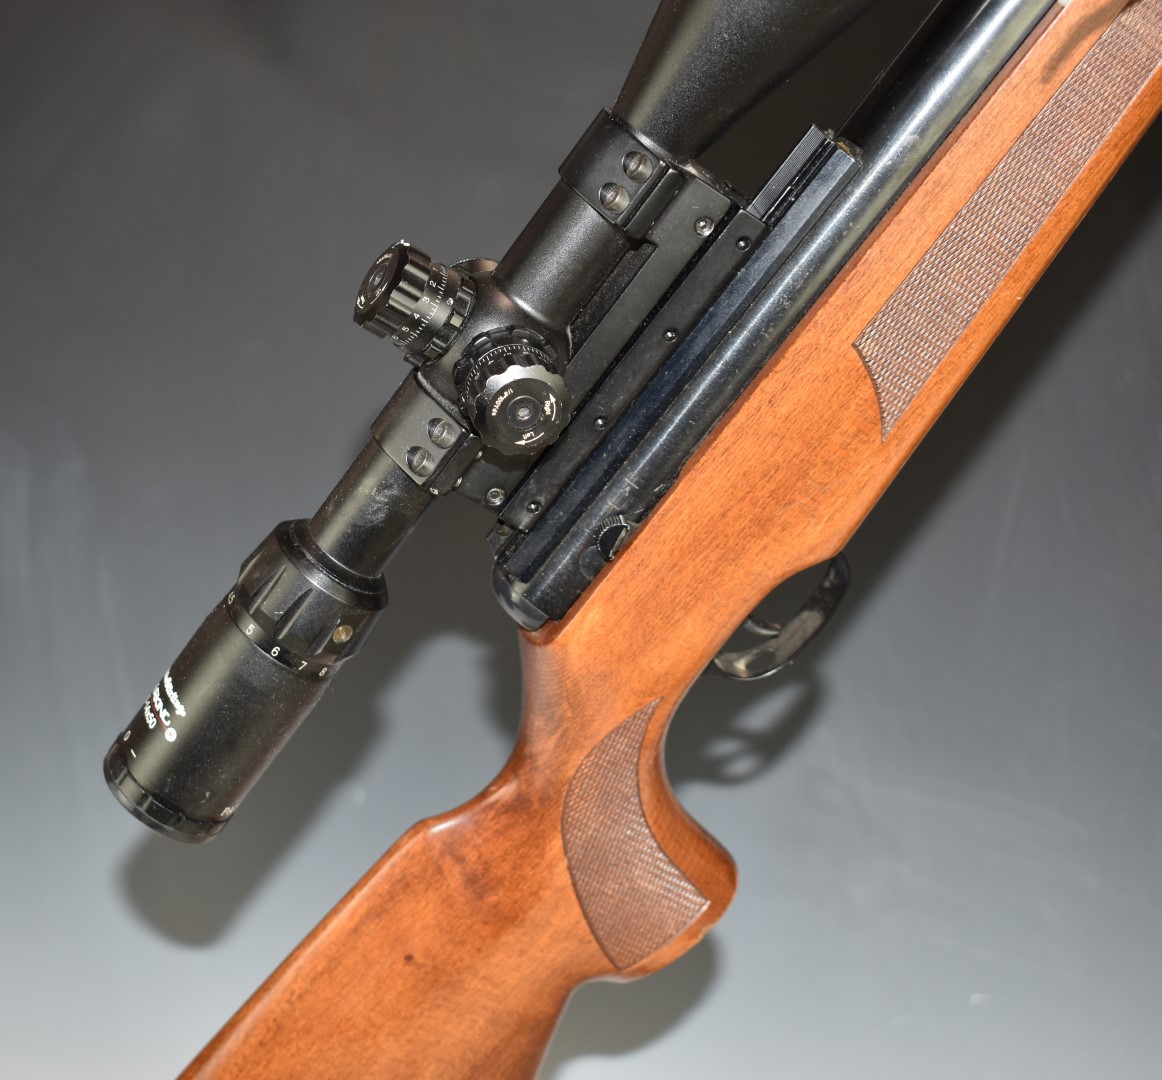 BSA .22 air rifle with chequered semi-pistol grip and forend, raised cheek piece, sound moderator